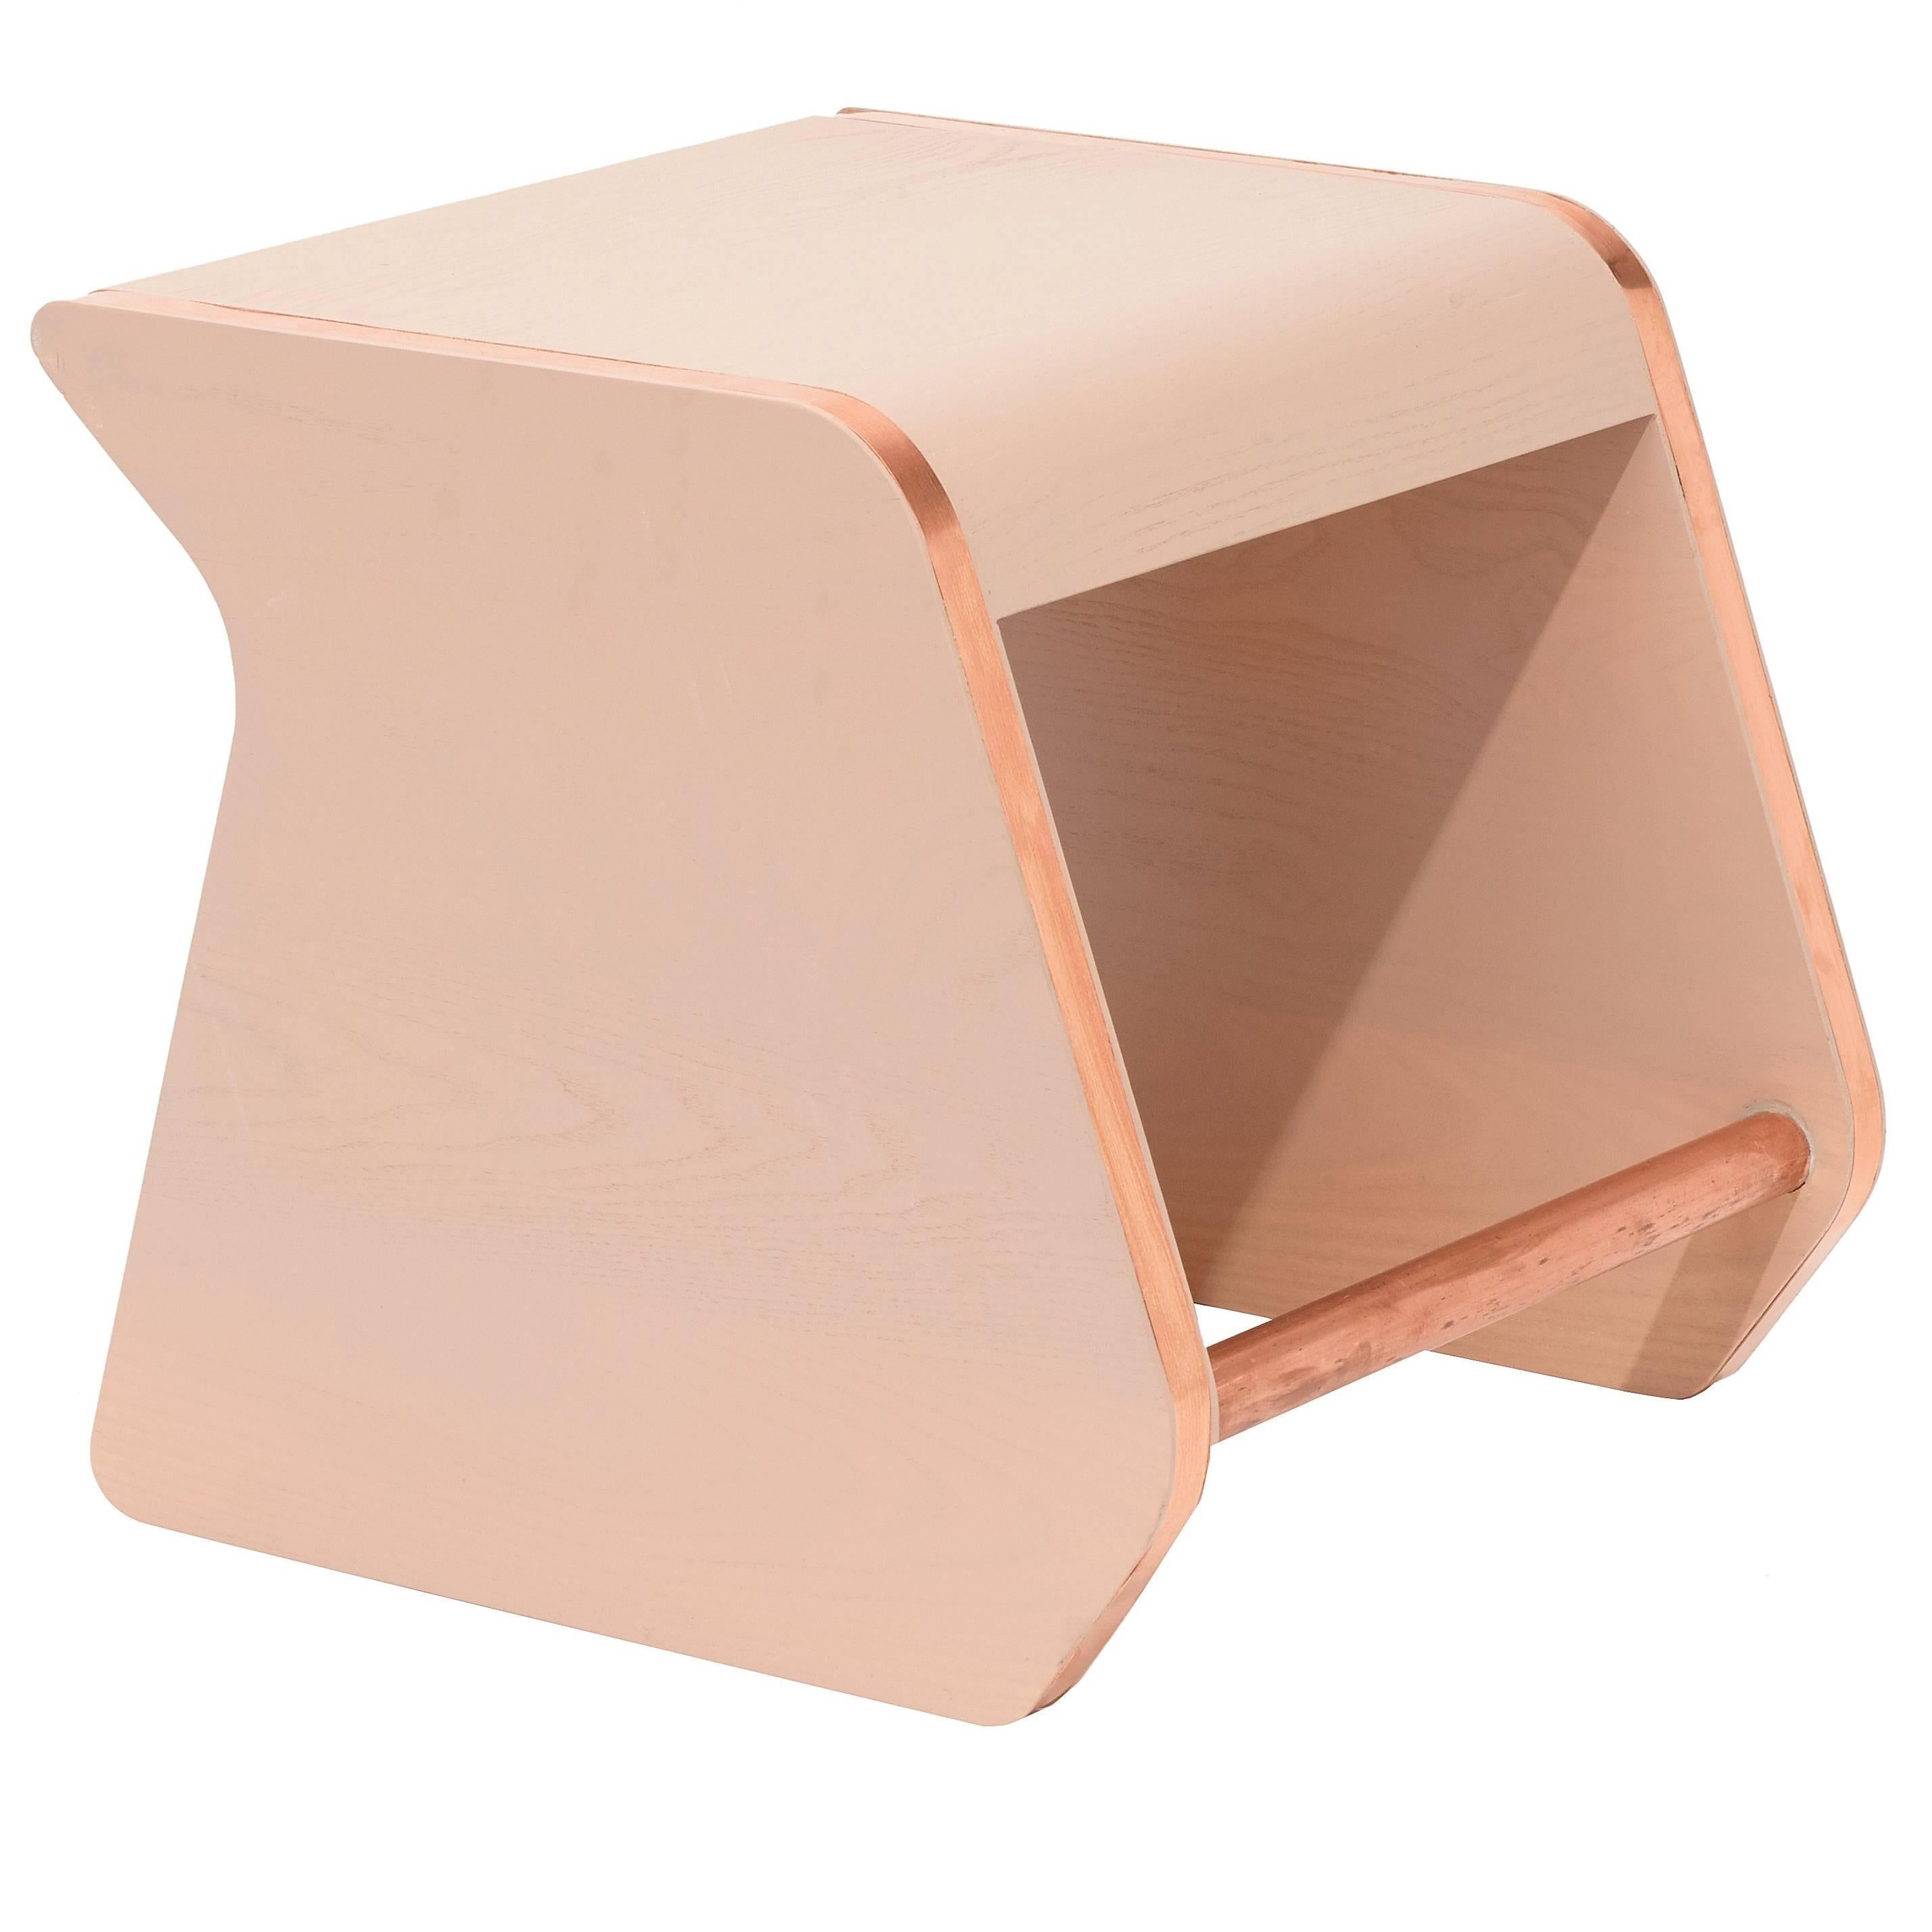 Heritage 'Perch' Child Chair by Studiokinder in Blush Pigmented Ash with Copper For Sale